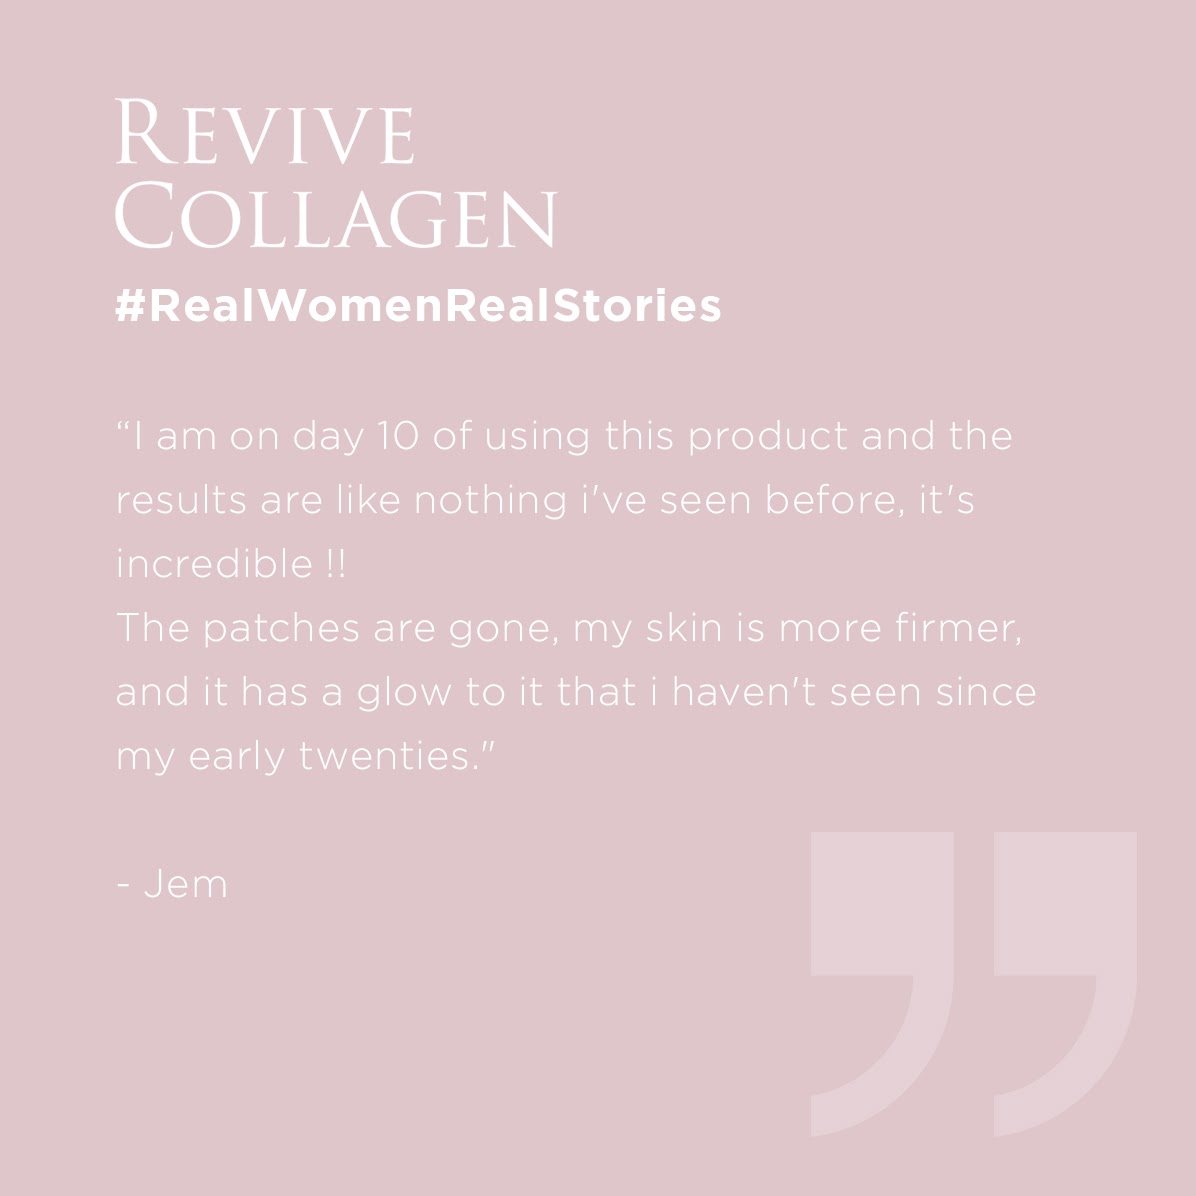 For noticeably radiant skin like Jem, incorporate Revive Collagen into your daily regime. Head over to revivecollagen.com to read more of Jems' review!